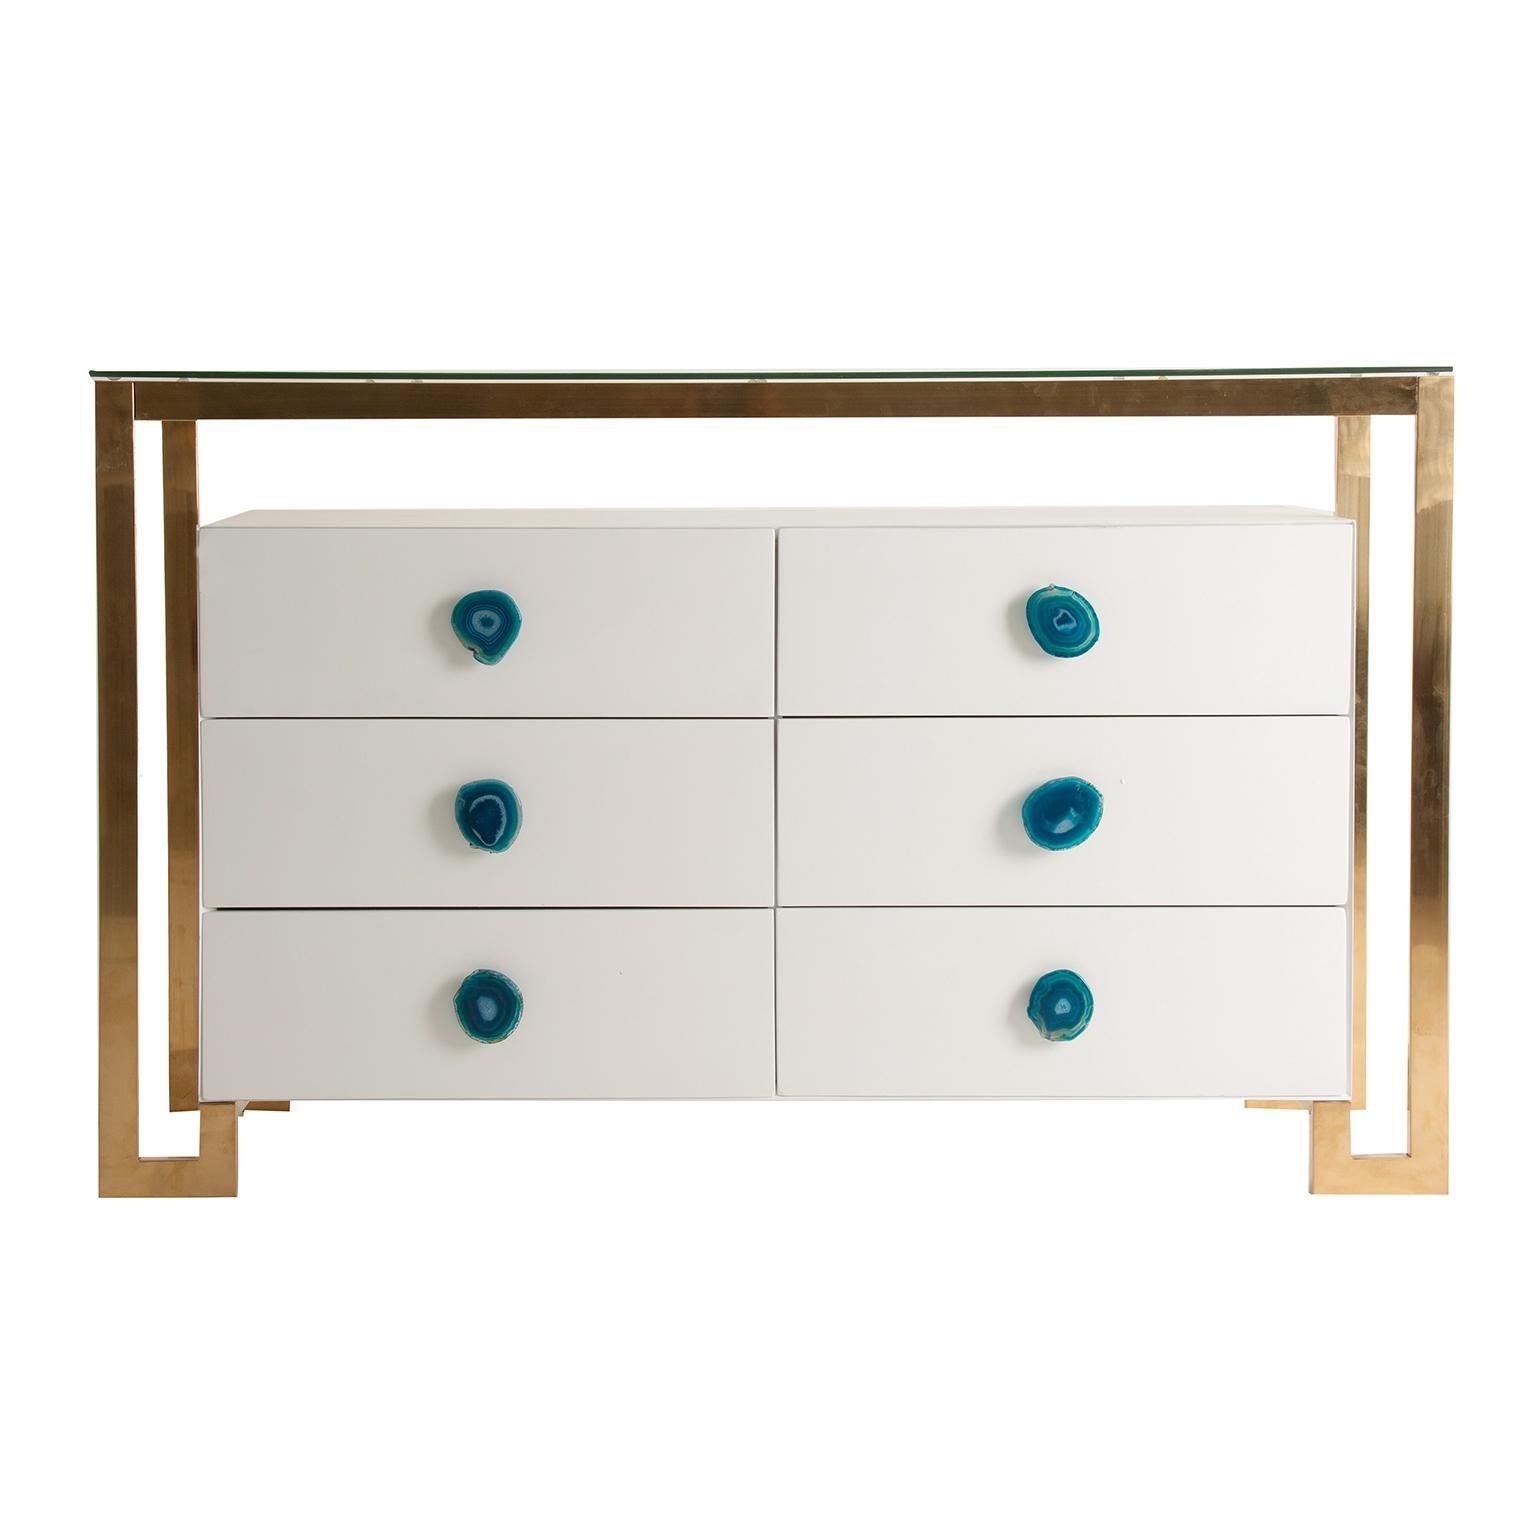 Gilded metal and white lacquer wooden with agate handles and glass tray large chest of drawers.